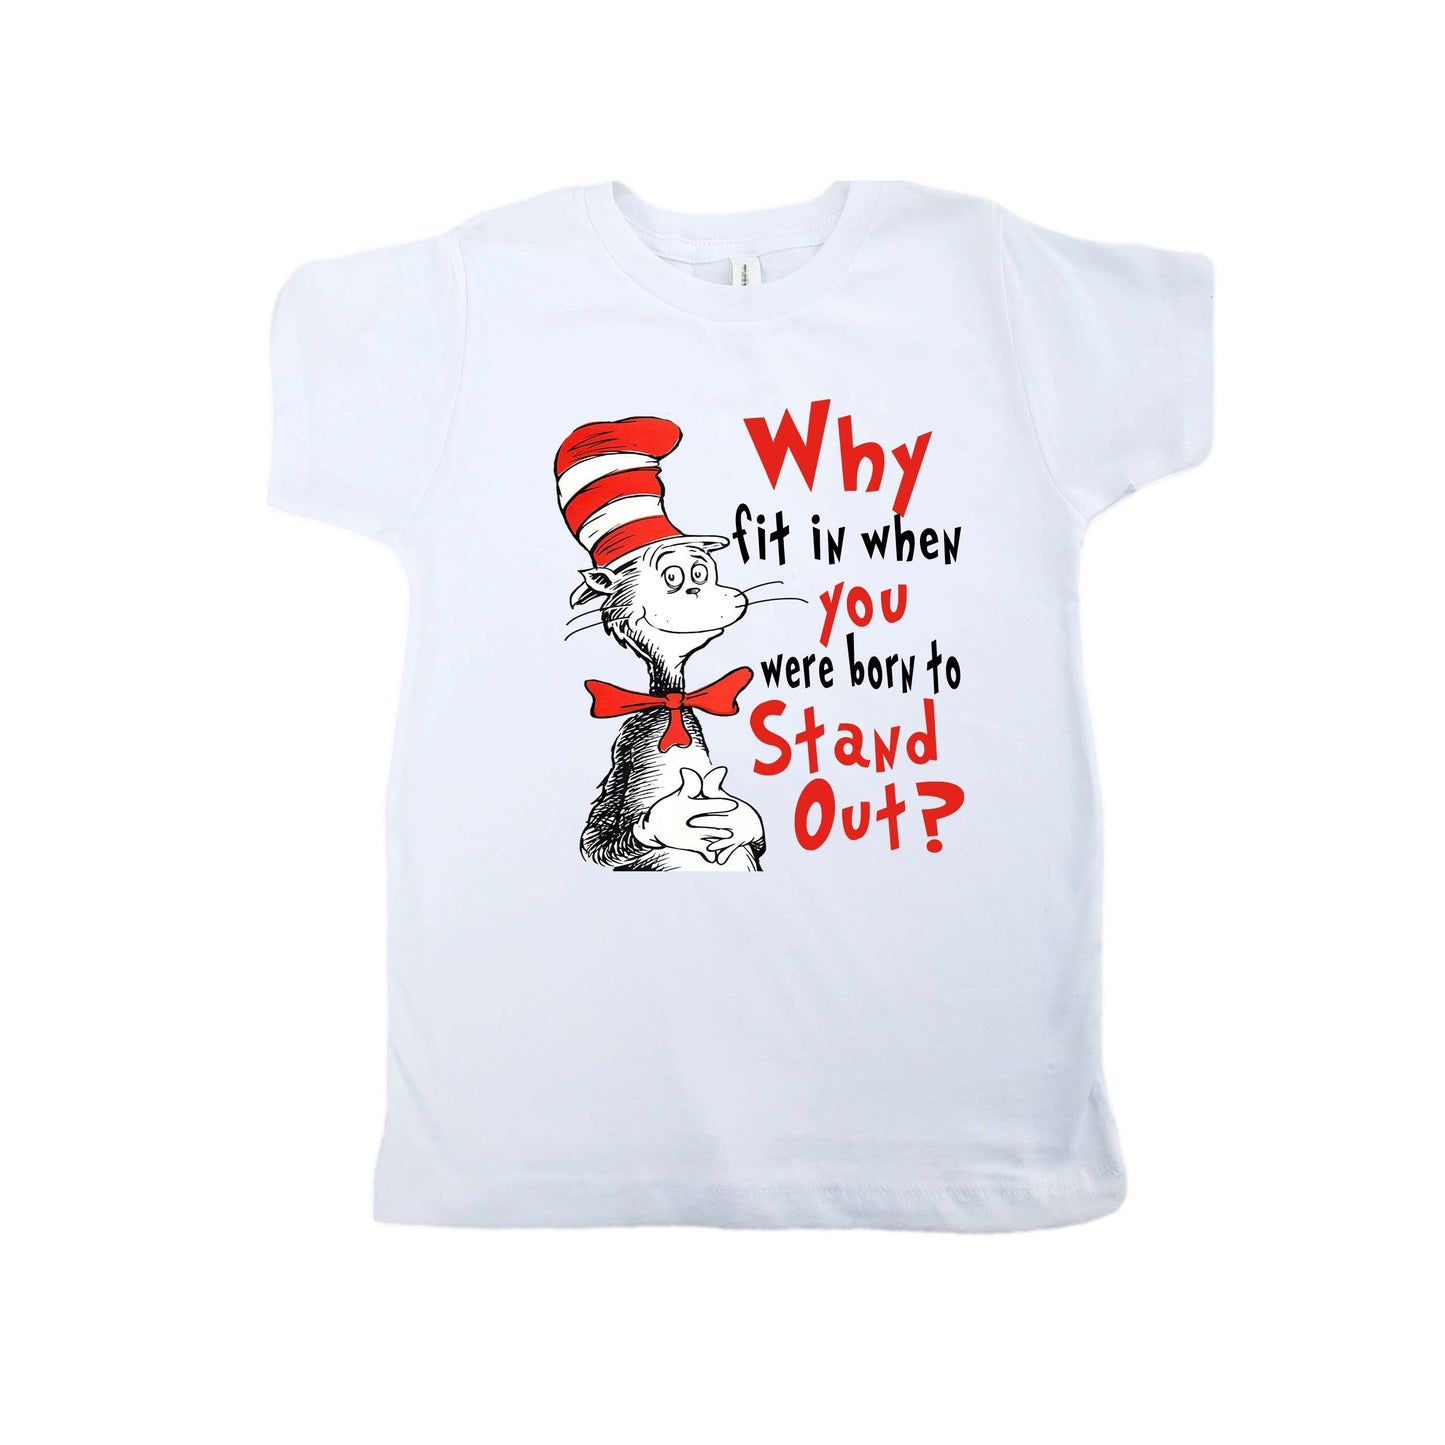 Cat in the Hat sayings shirt 